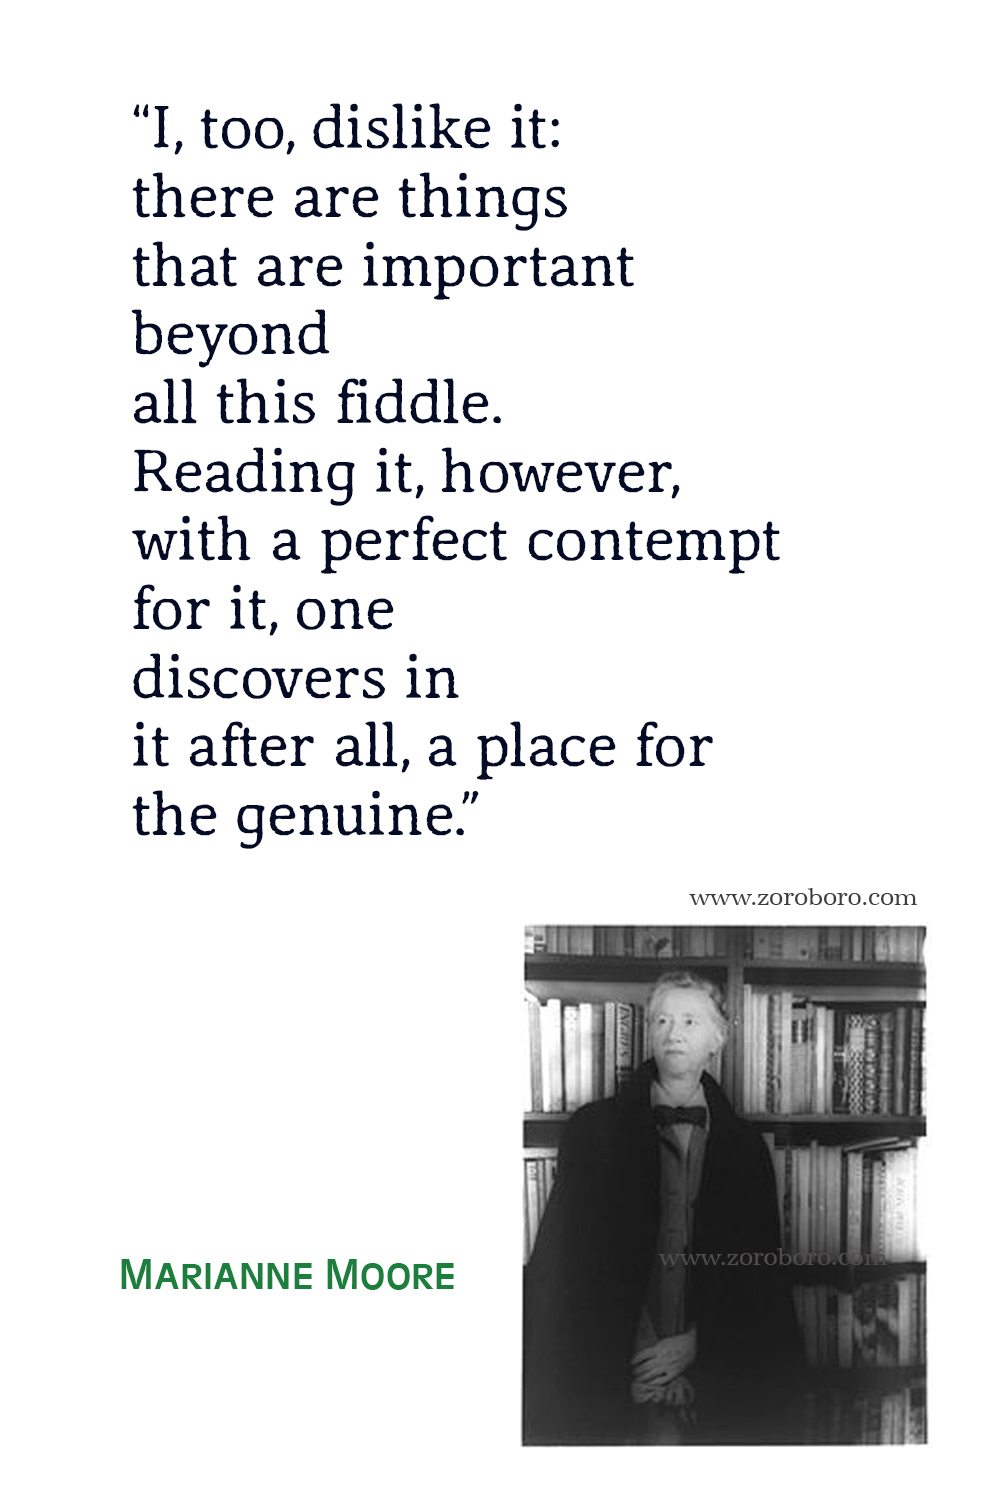 Marianne Moore Quotes, Marianne Moore Poems, Marianne Moore Poetry, Marianne Moore Books Quotes, Marianne Moore Selected Poems.